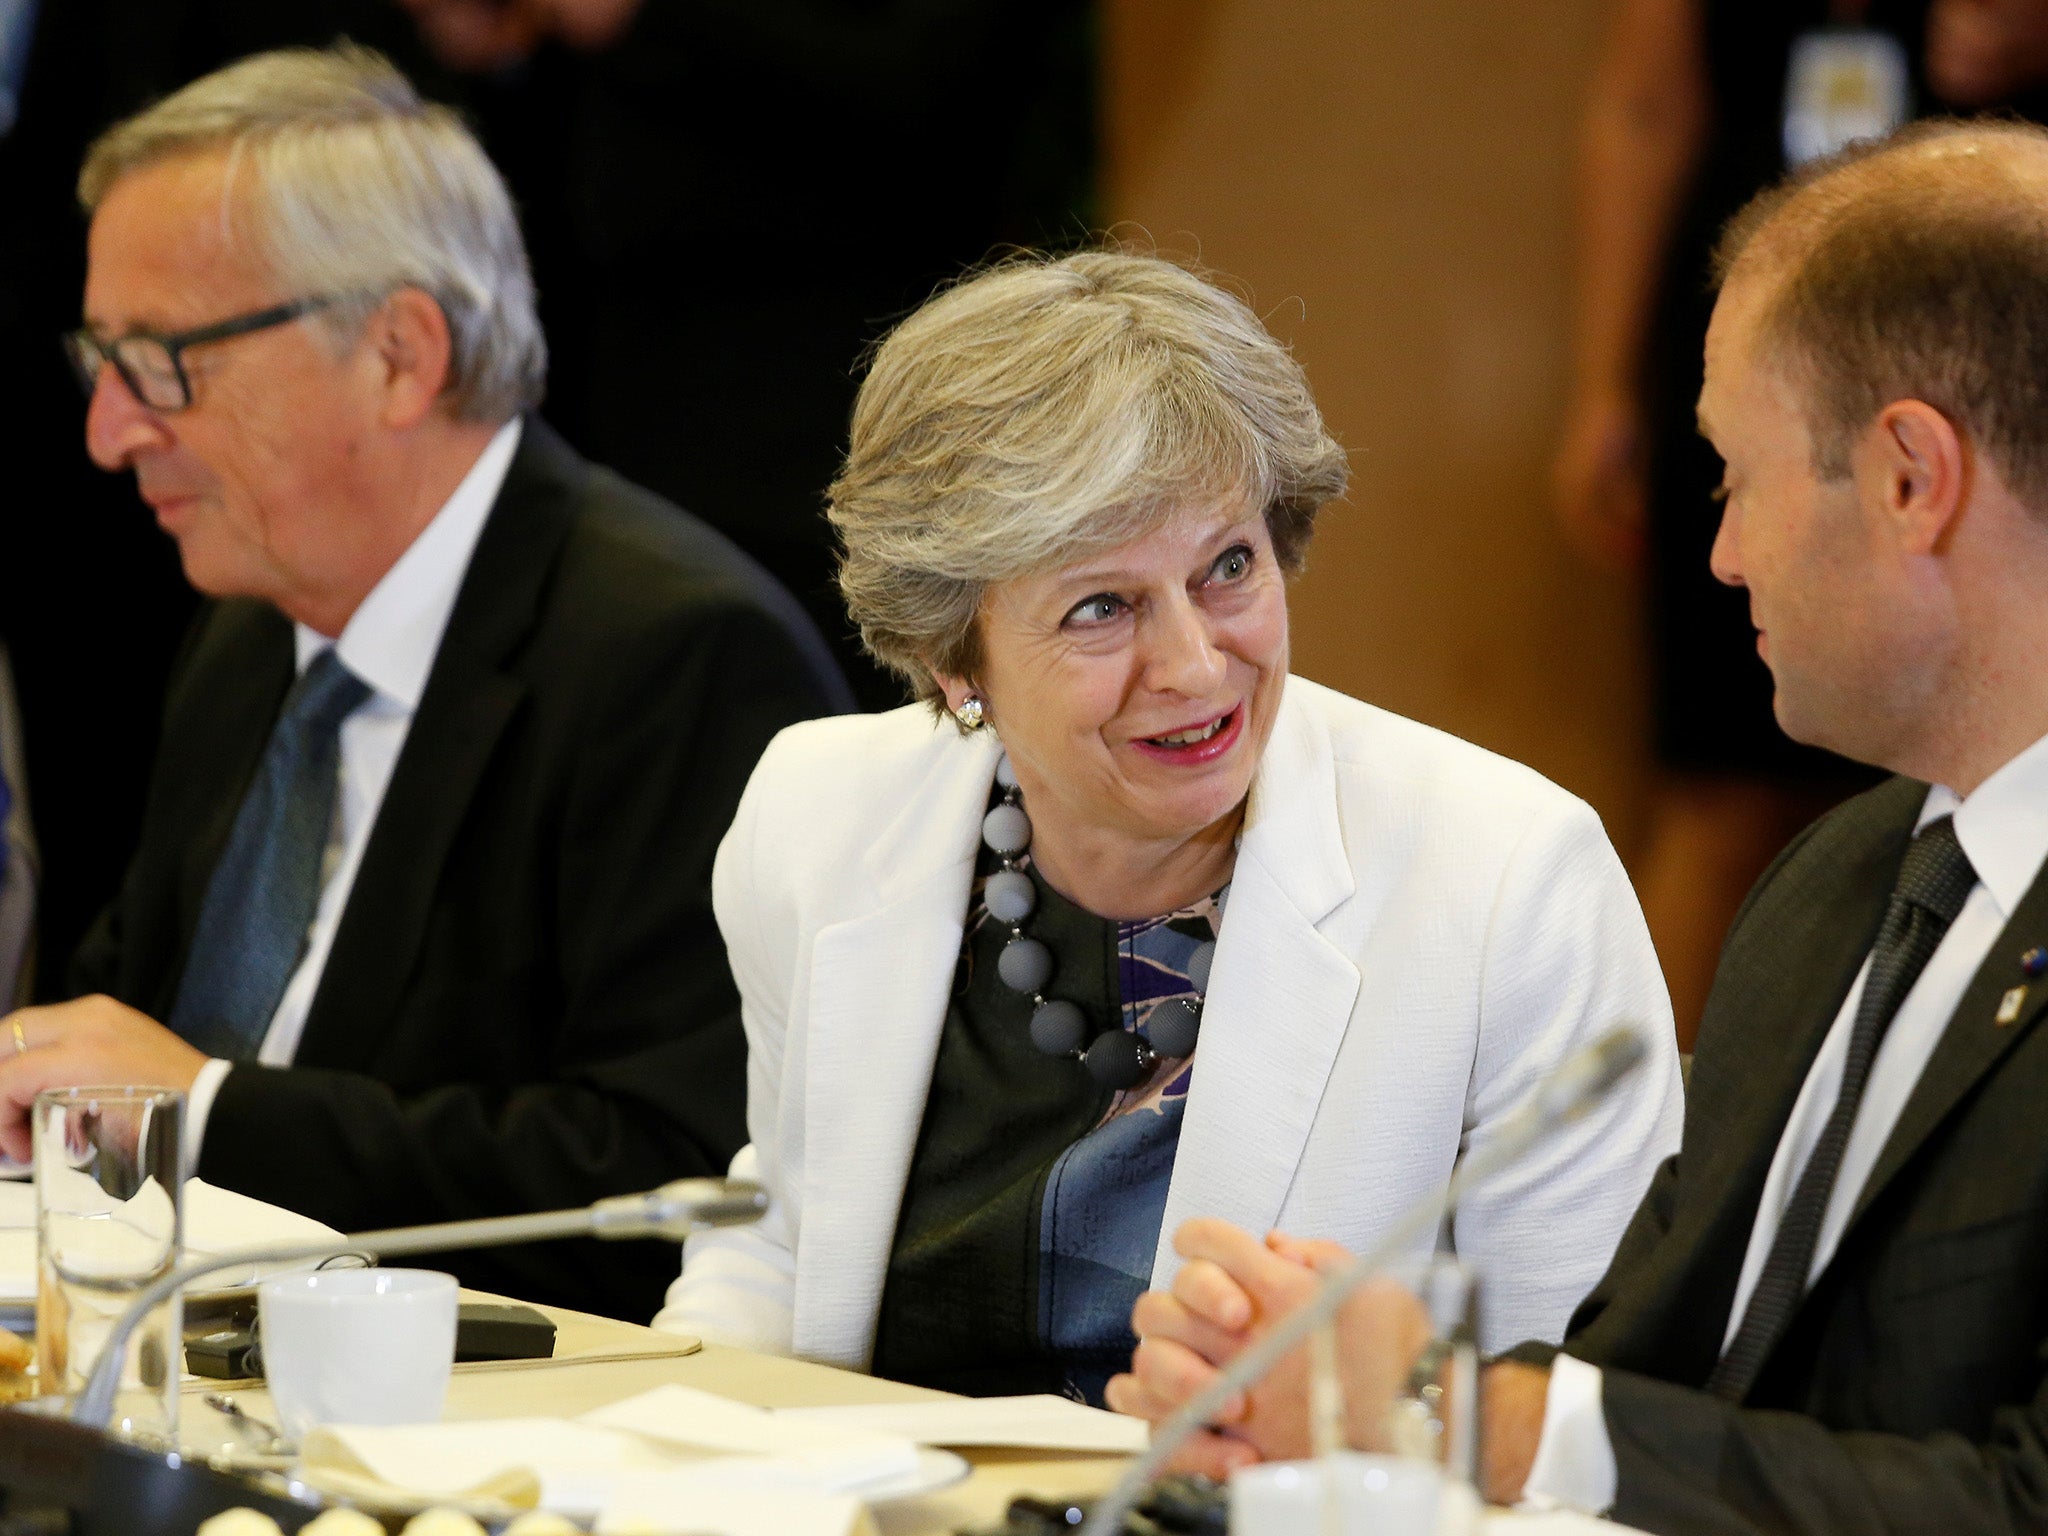 Theresa May, Donald Tusk and Jean-Claude Juncker’s second date was just as disastrous as the first, you may or may not be shocked to learn